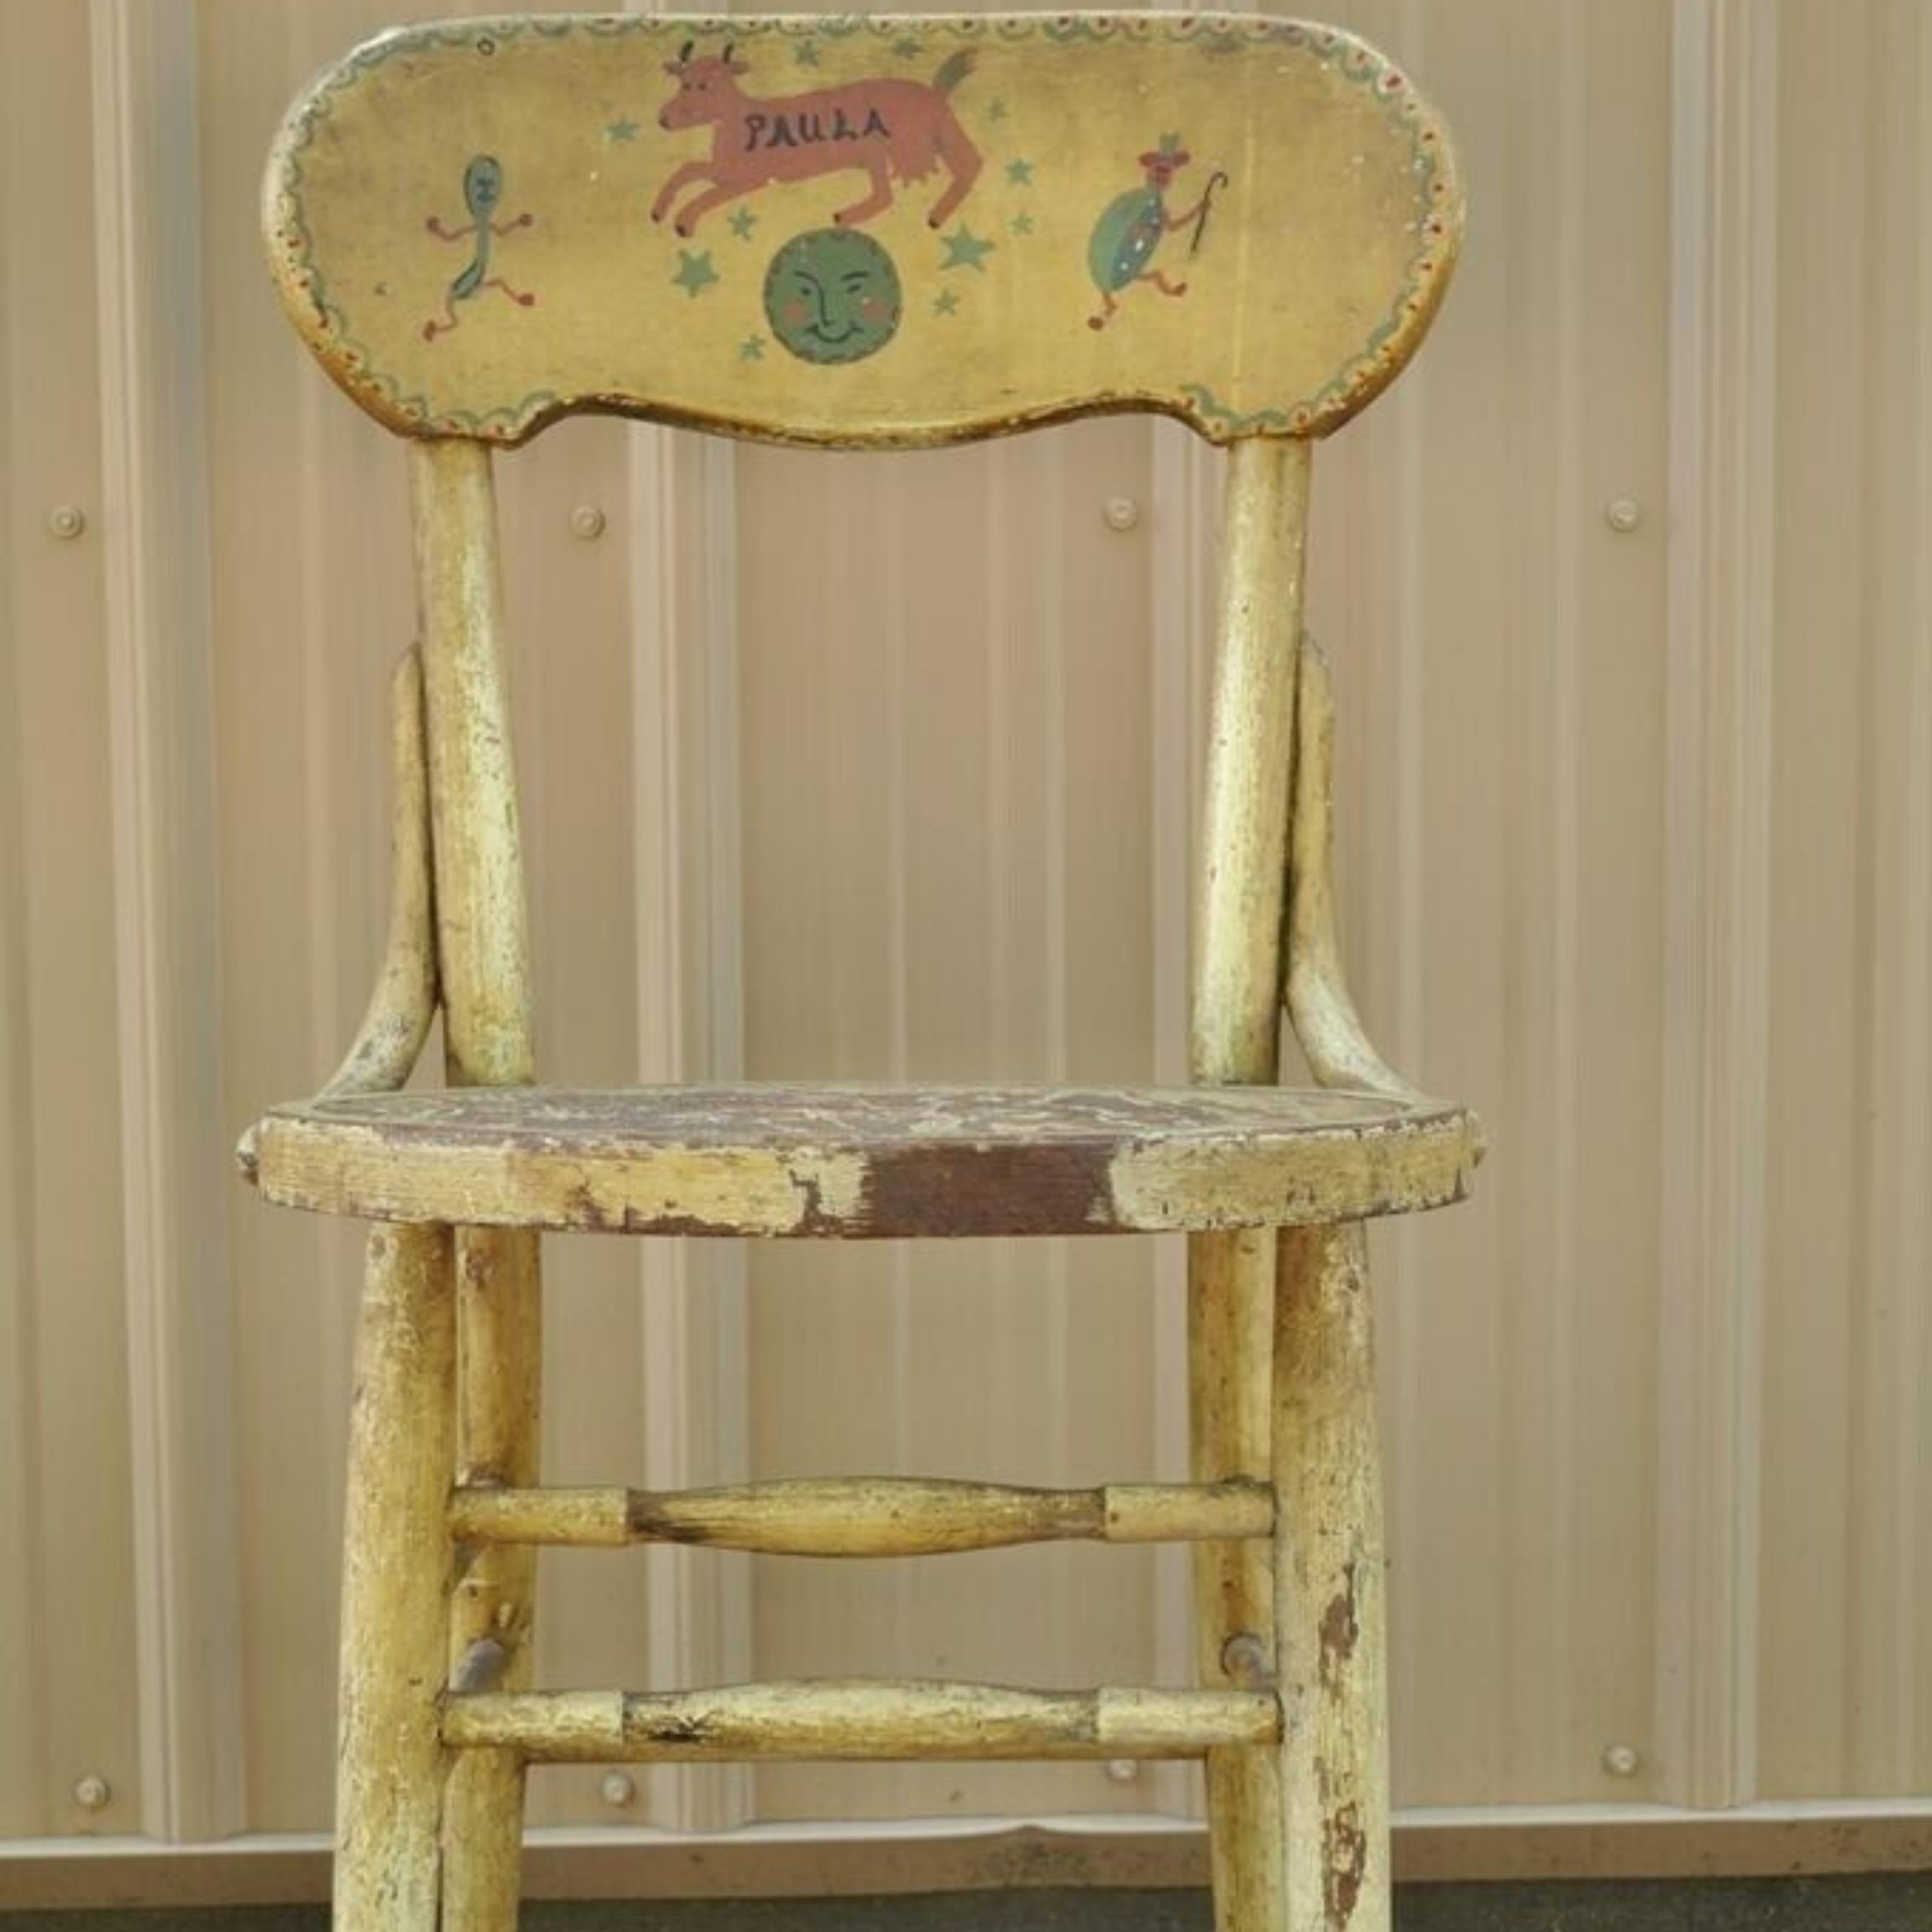 Antique Rustic Primitive Distress Hand Painted Nursery Rhymes Side Accent Chair. Item features the original hand painted back splat, stretcher base, very nice antique item. Circa Early 1900s. Measurements: 33.5